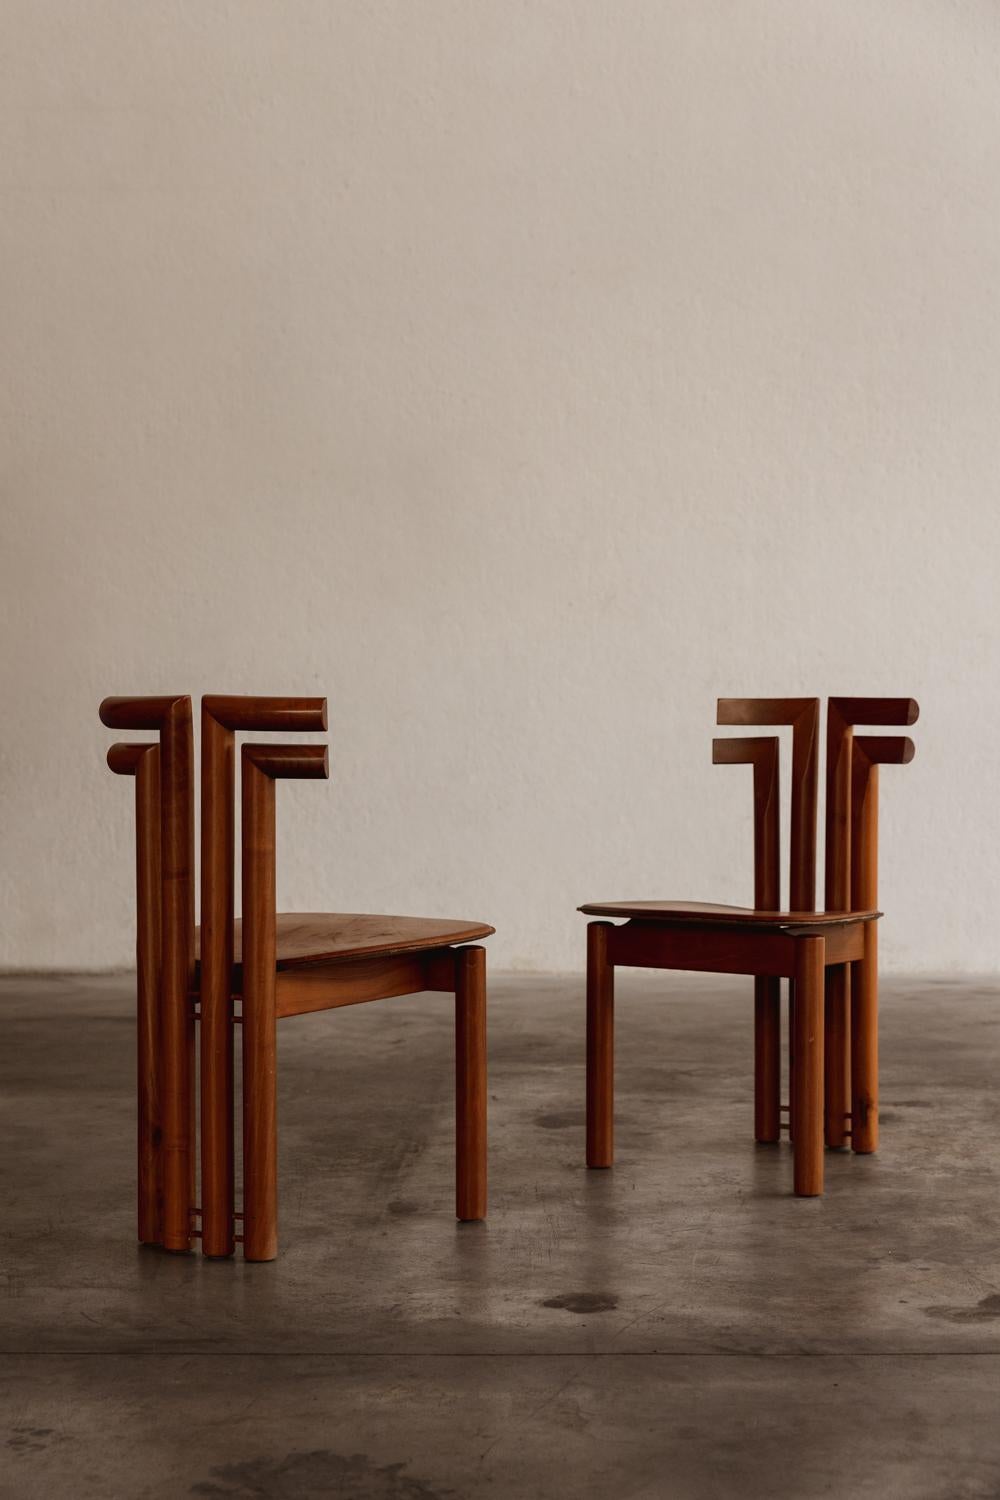 Mario Marenco “Sapporo” Dining Chairs for Mobil Girgi, 1970, set of 2 For Sale 1